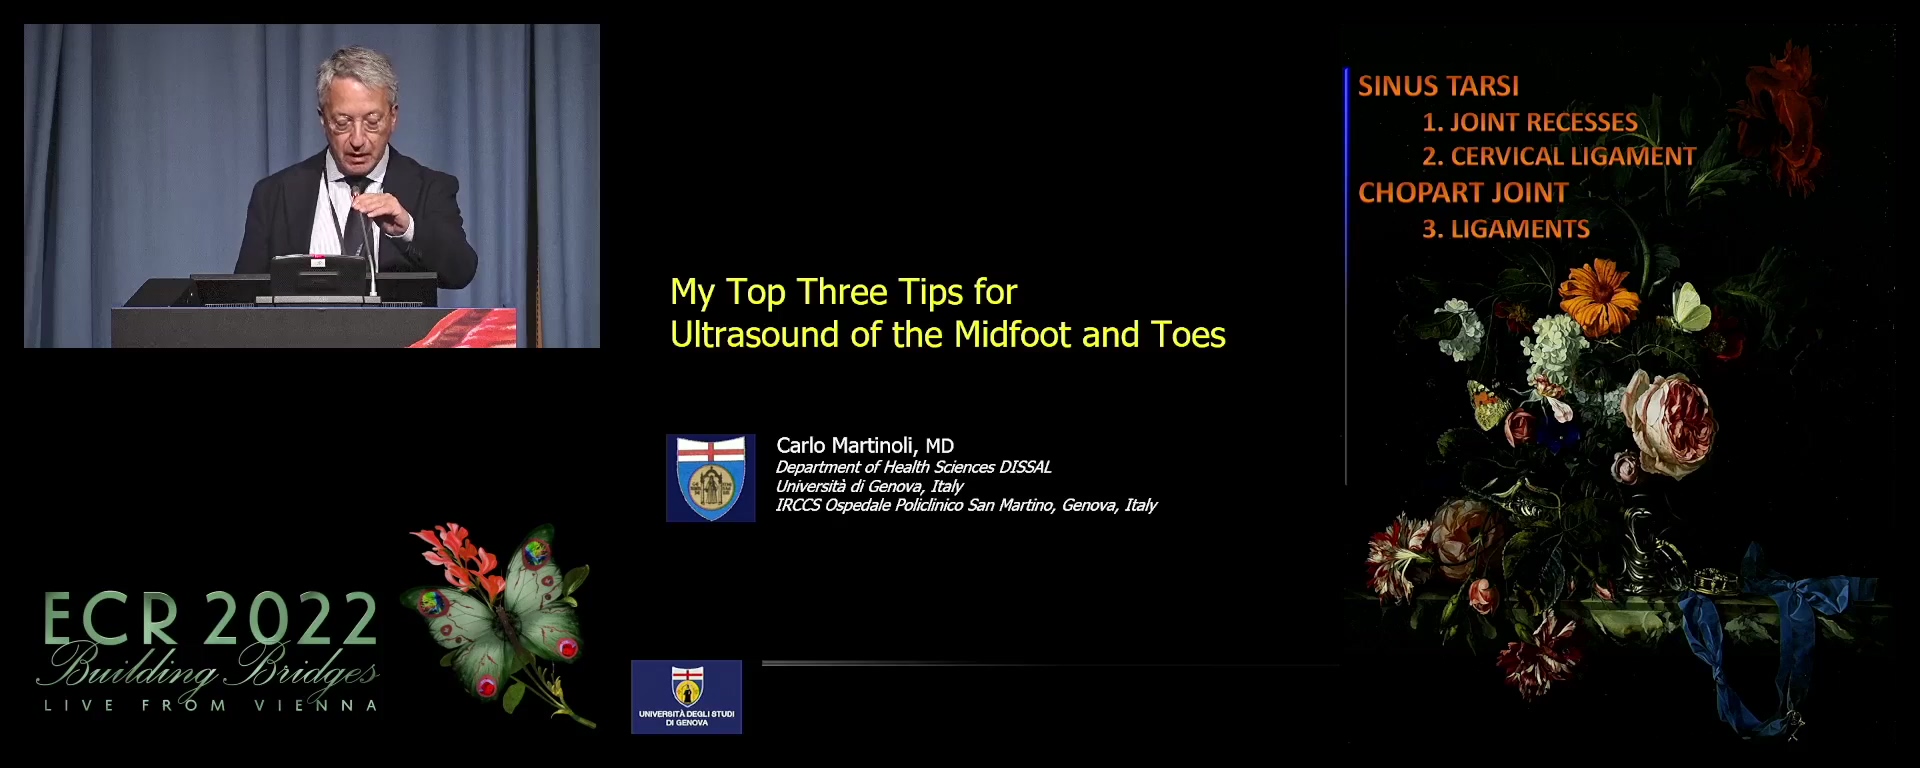 My top three tips for ultrasound of the midfoot and toes - Carlo Martinoli, Genoa / IT